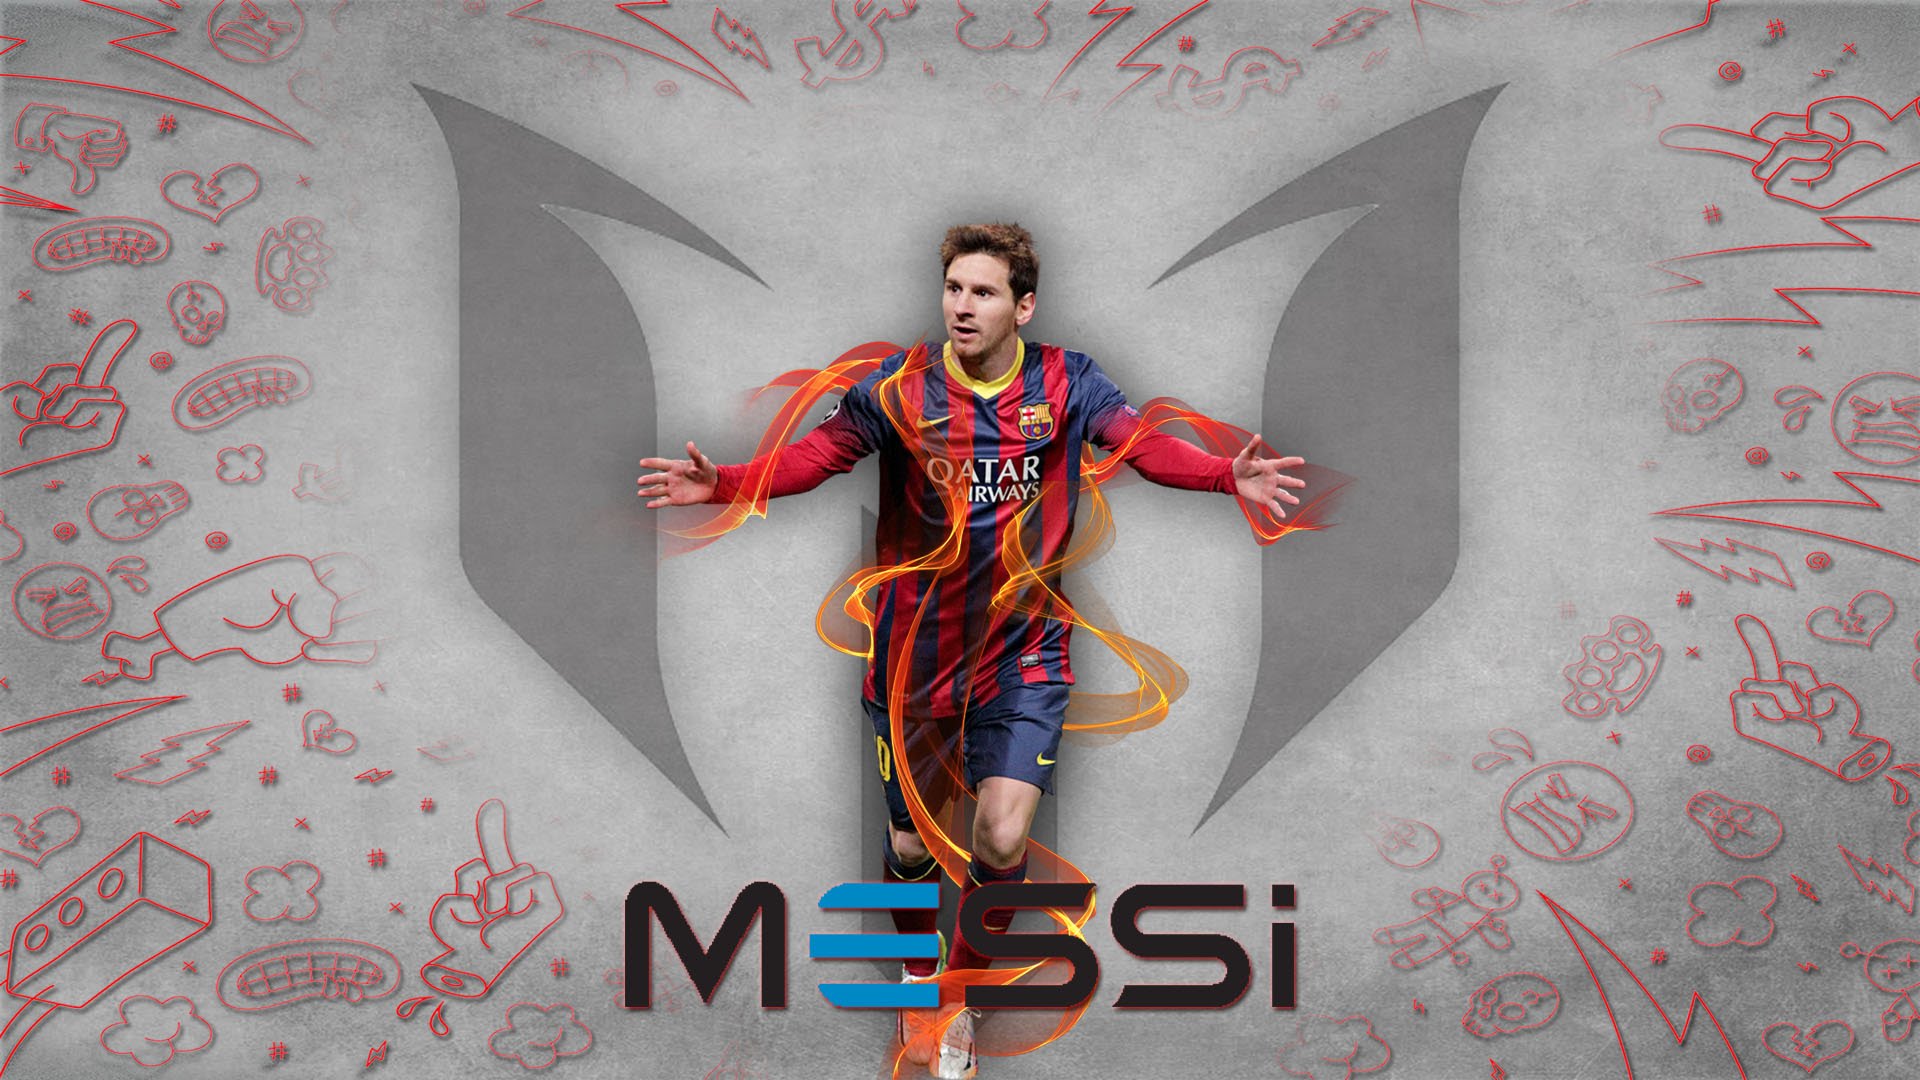 Messi Power Wallpaper Players Teams Leagues